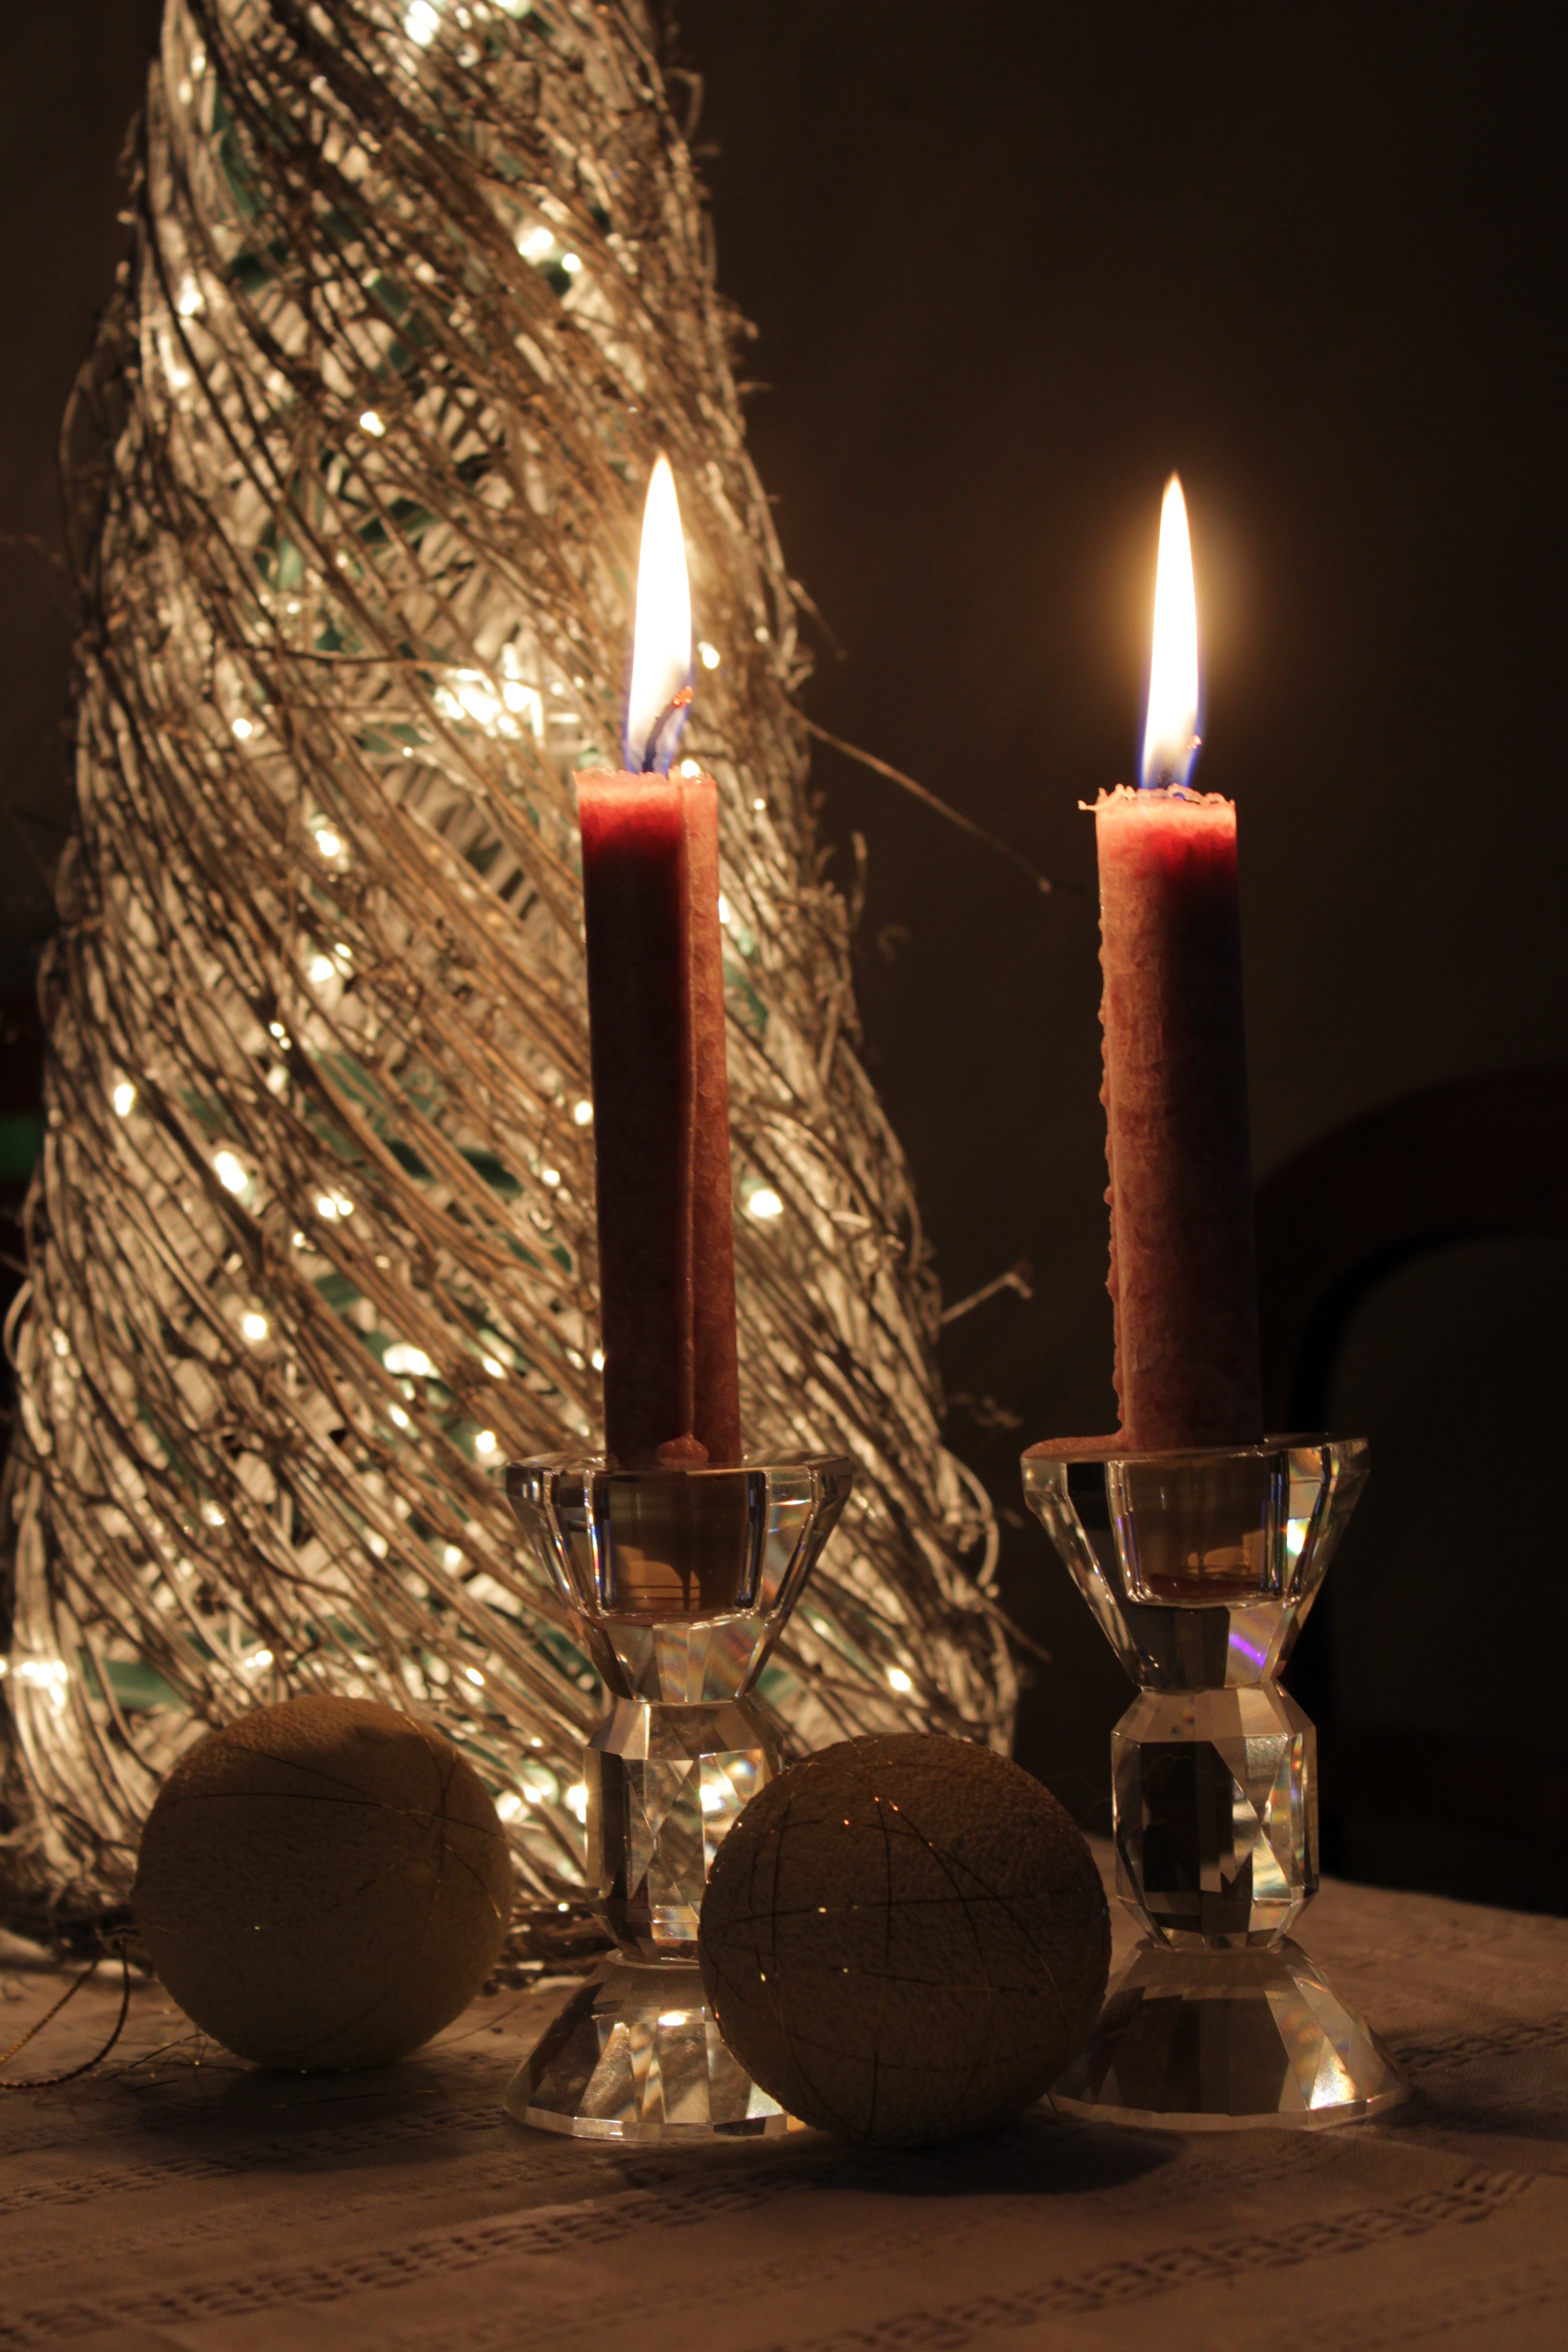 Free Images : winter, night, evening, holiday, candle, lighting ...